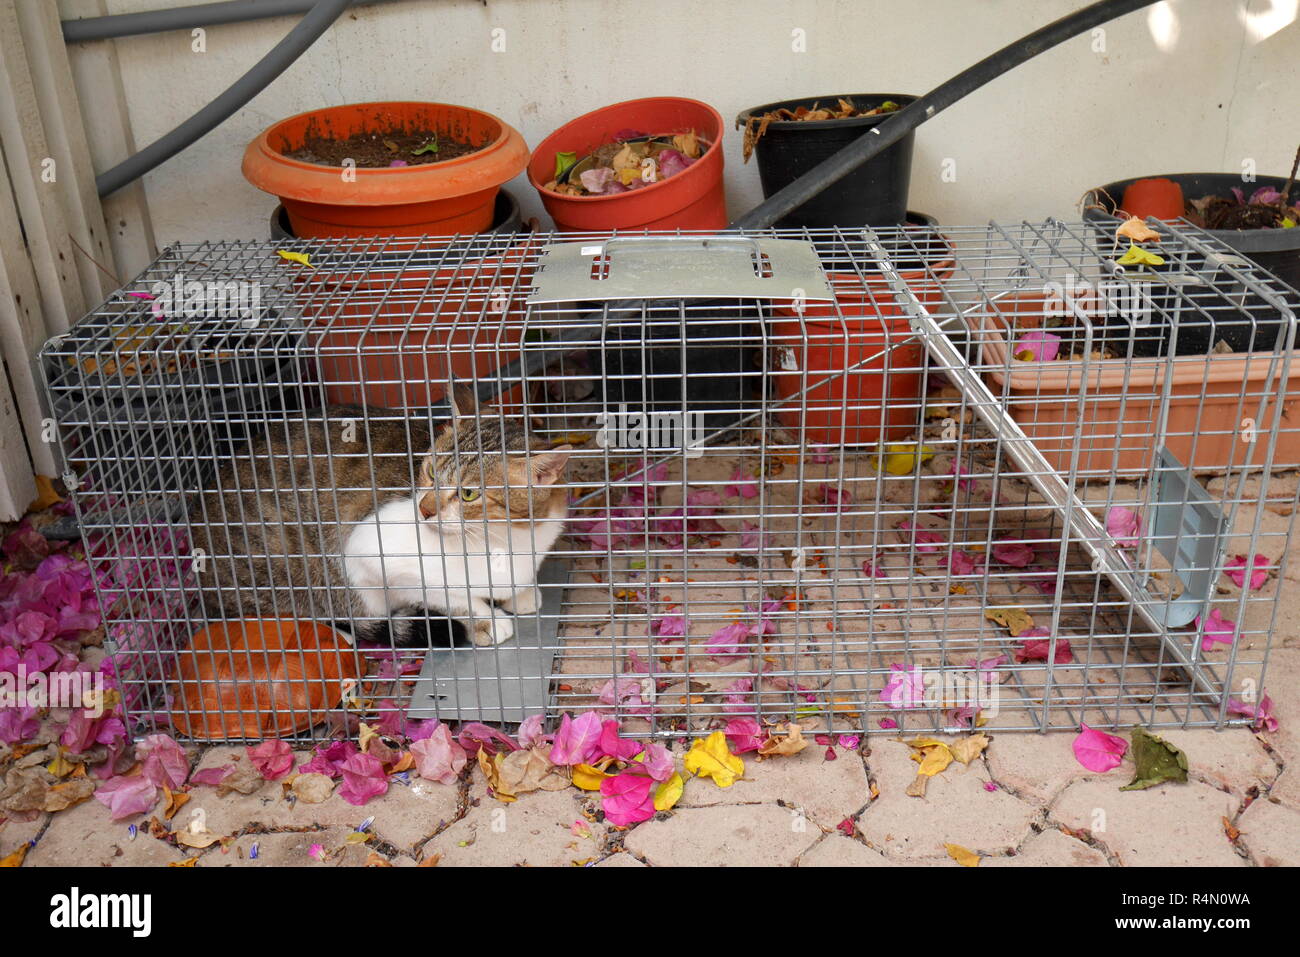 Feral cat caught in a humane cat trap prior to being neutered and released,  Kingdom of Bahrain Stock Photo - Alamy